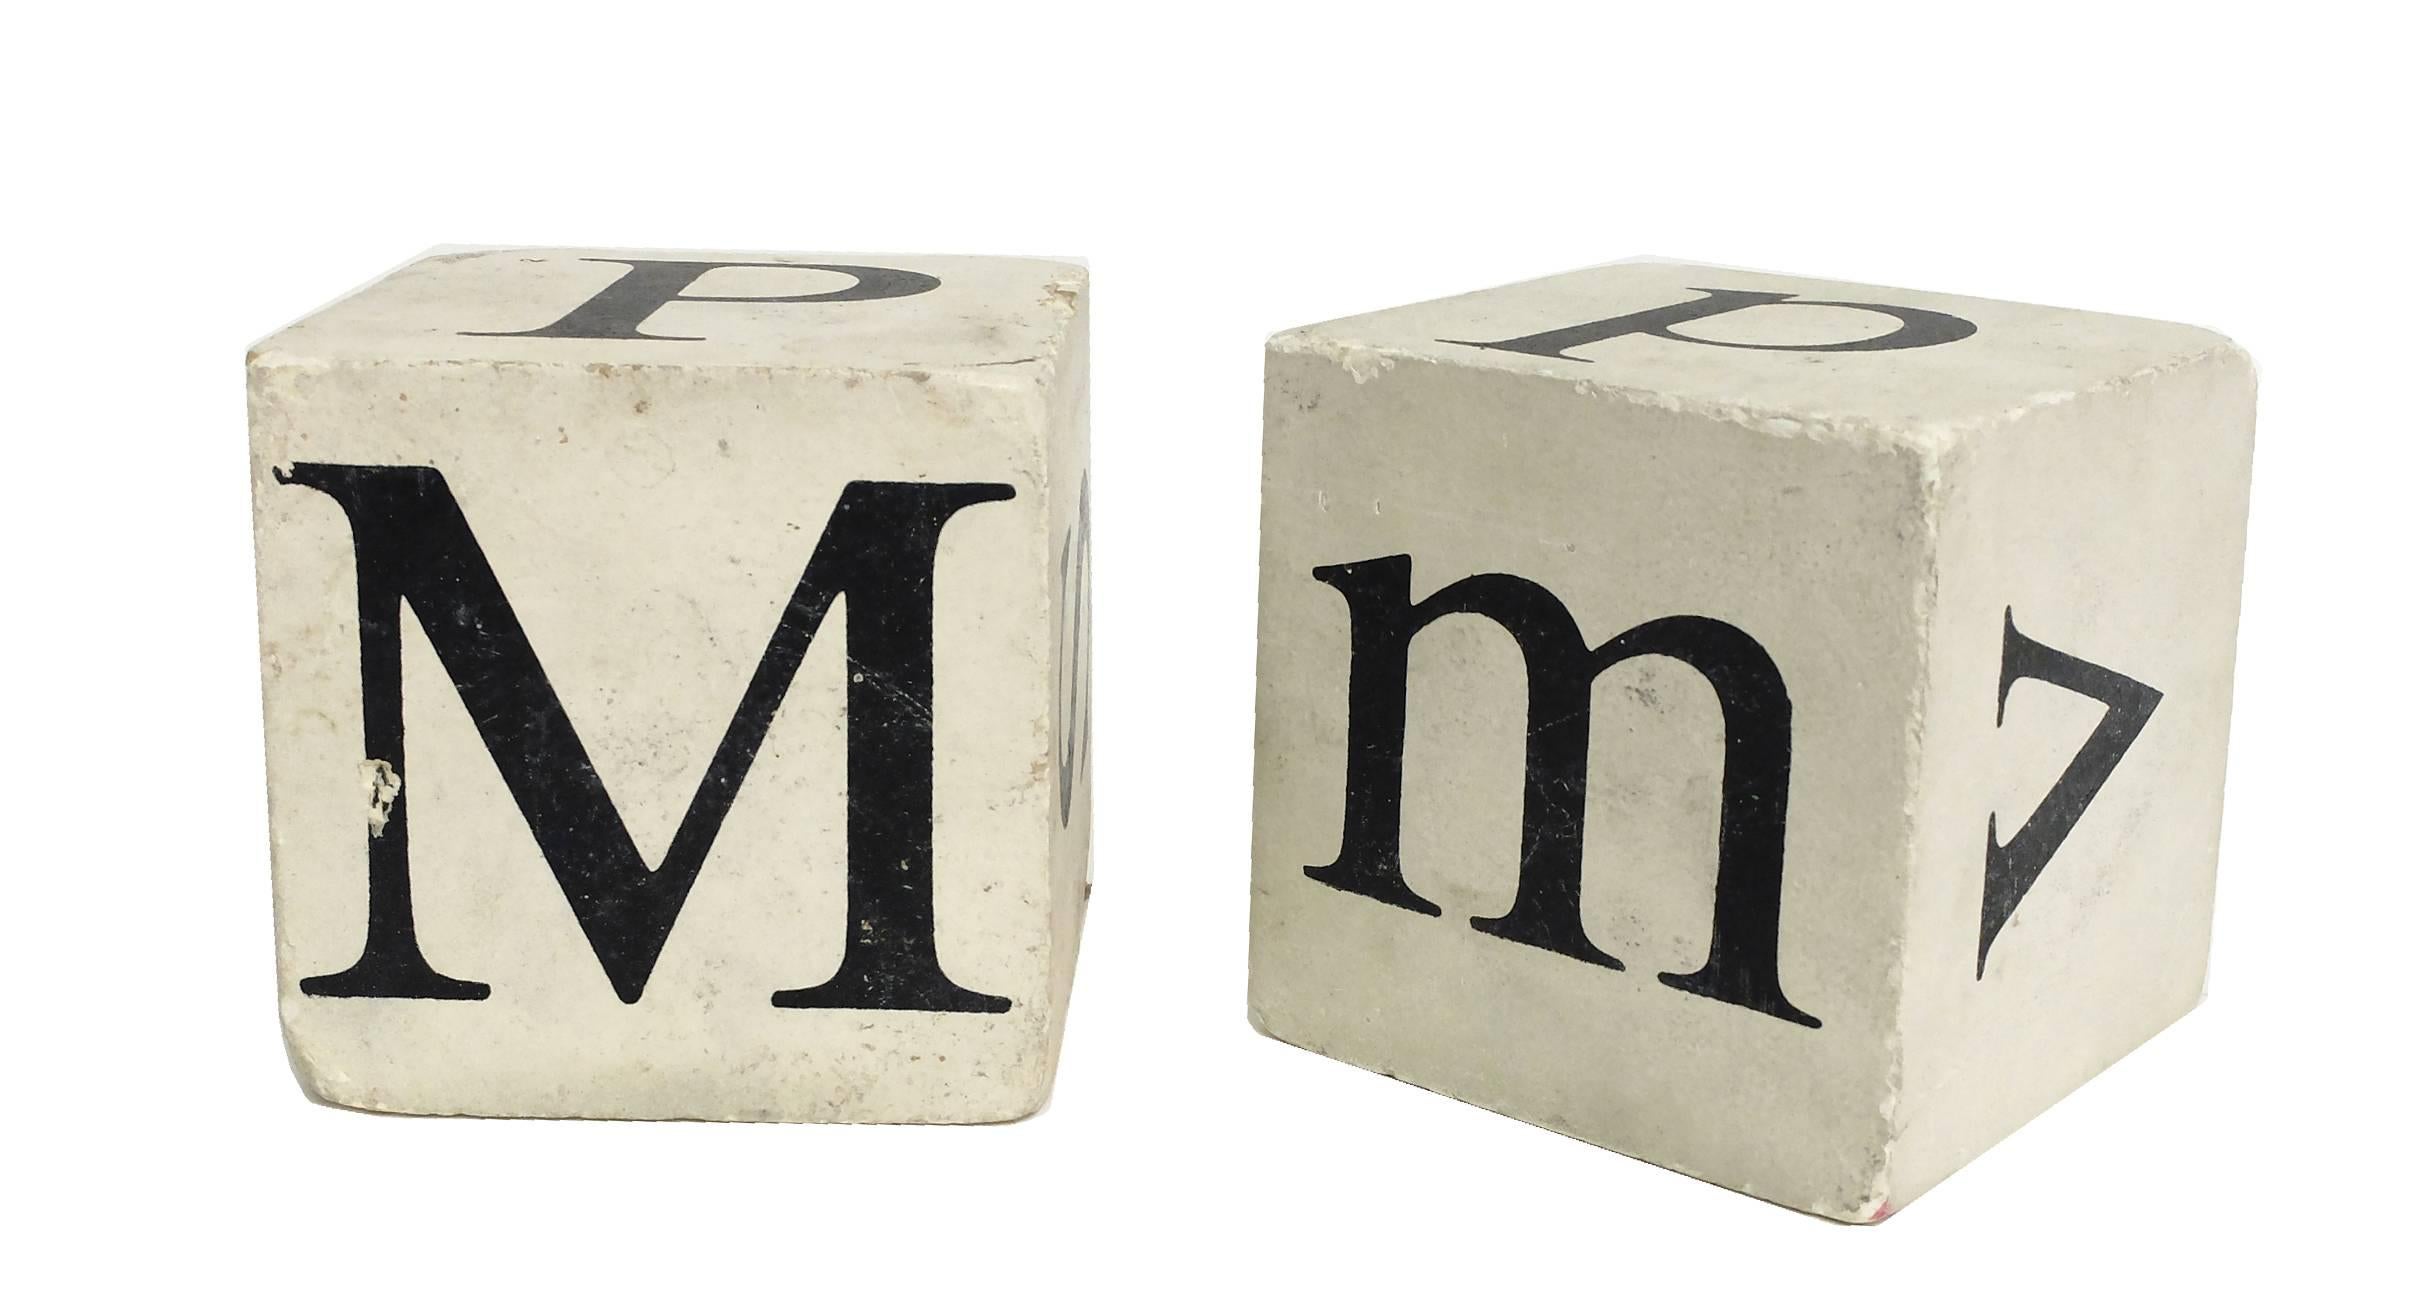 Pair of dice made of paper mâché and plaster, painted black on white with different black letters in each face of the cube, USA, circa 1900.